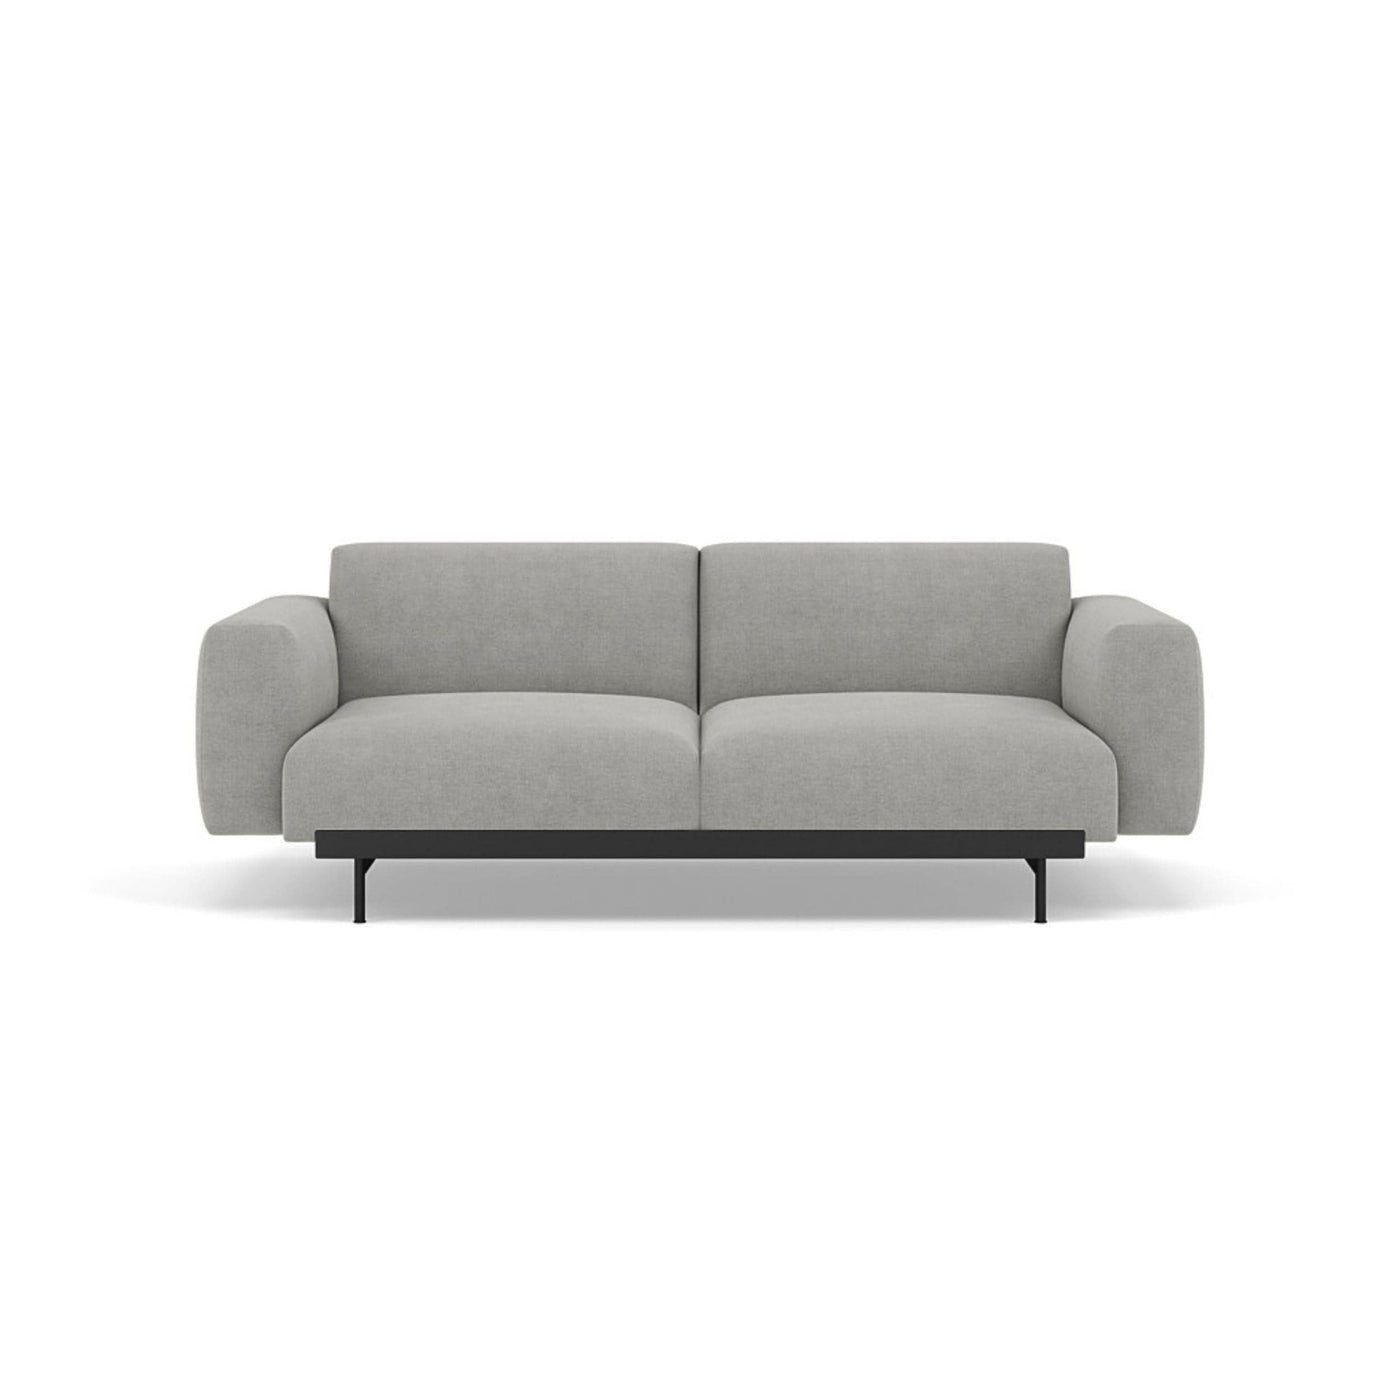 Muuto In Situ Modular 2 Seater Sofa, configuration 1. Made to order from someday designs #colour_fiord-151